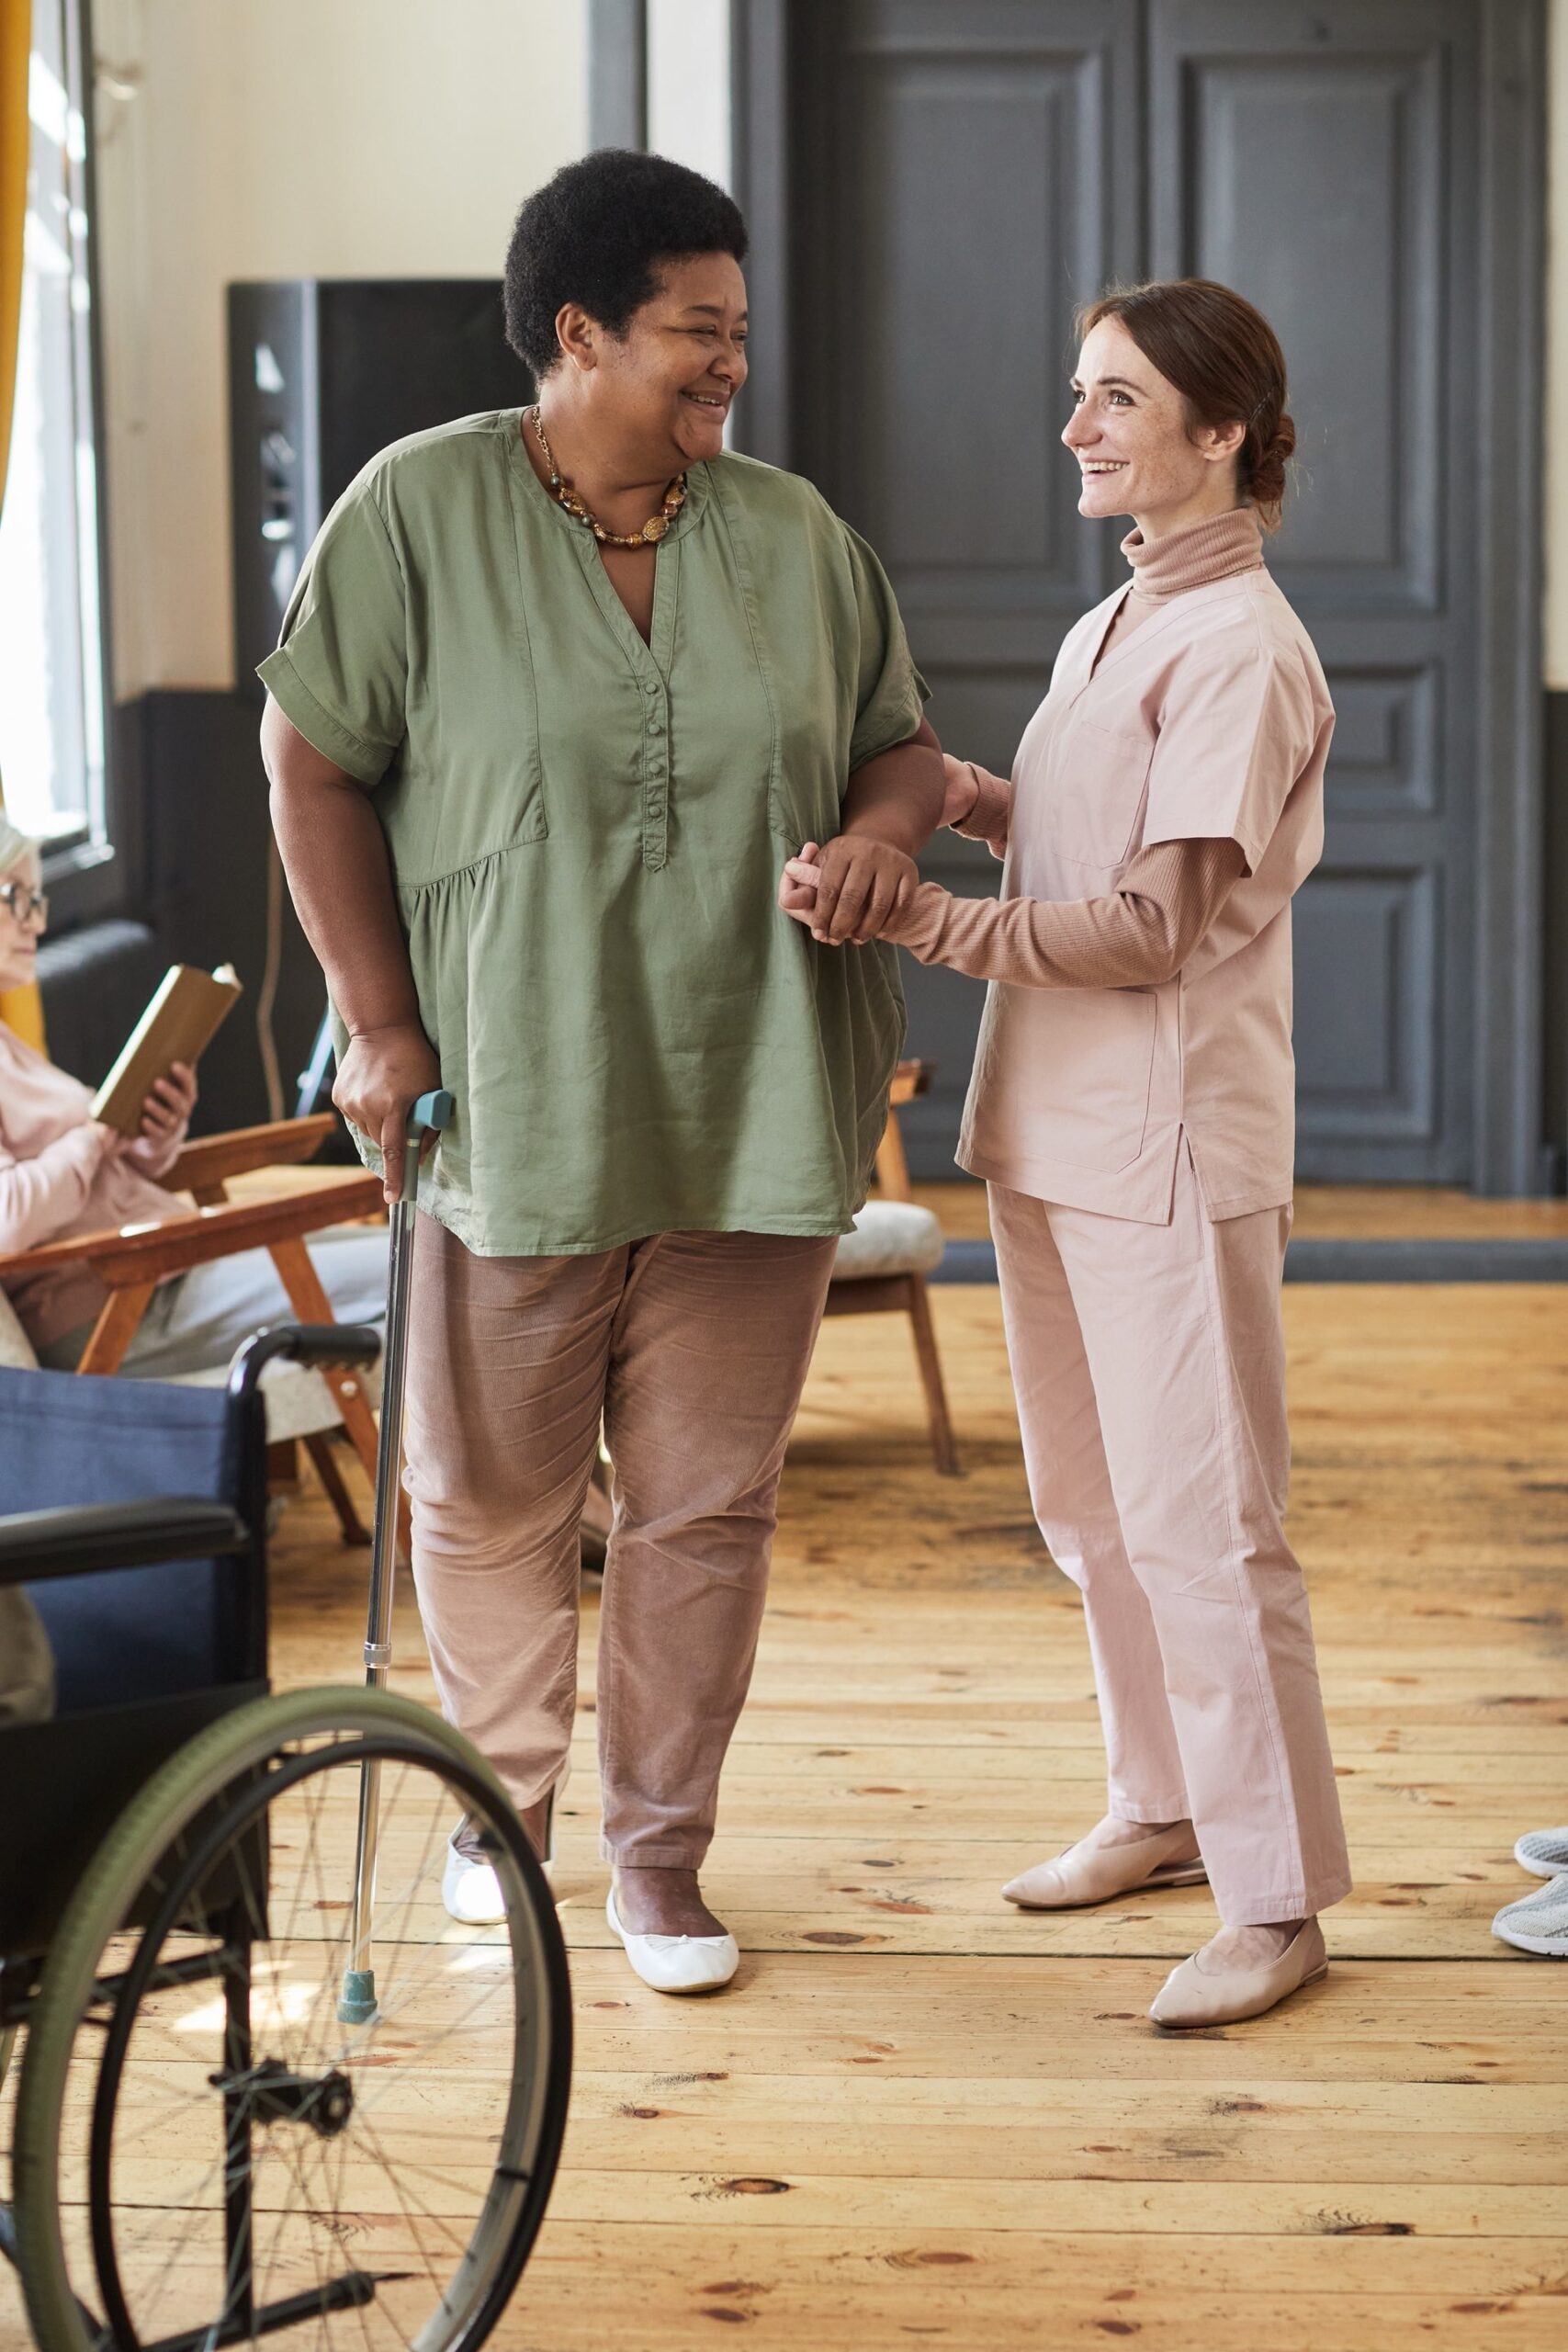 Vertical full length portrait of smiling young woman helping seniors in modern retirement home